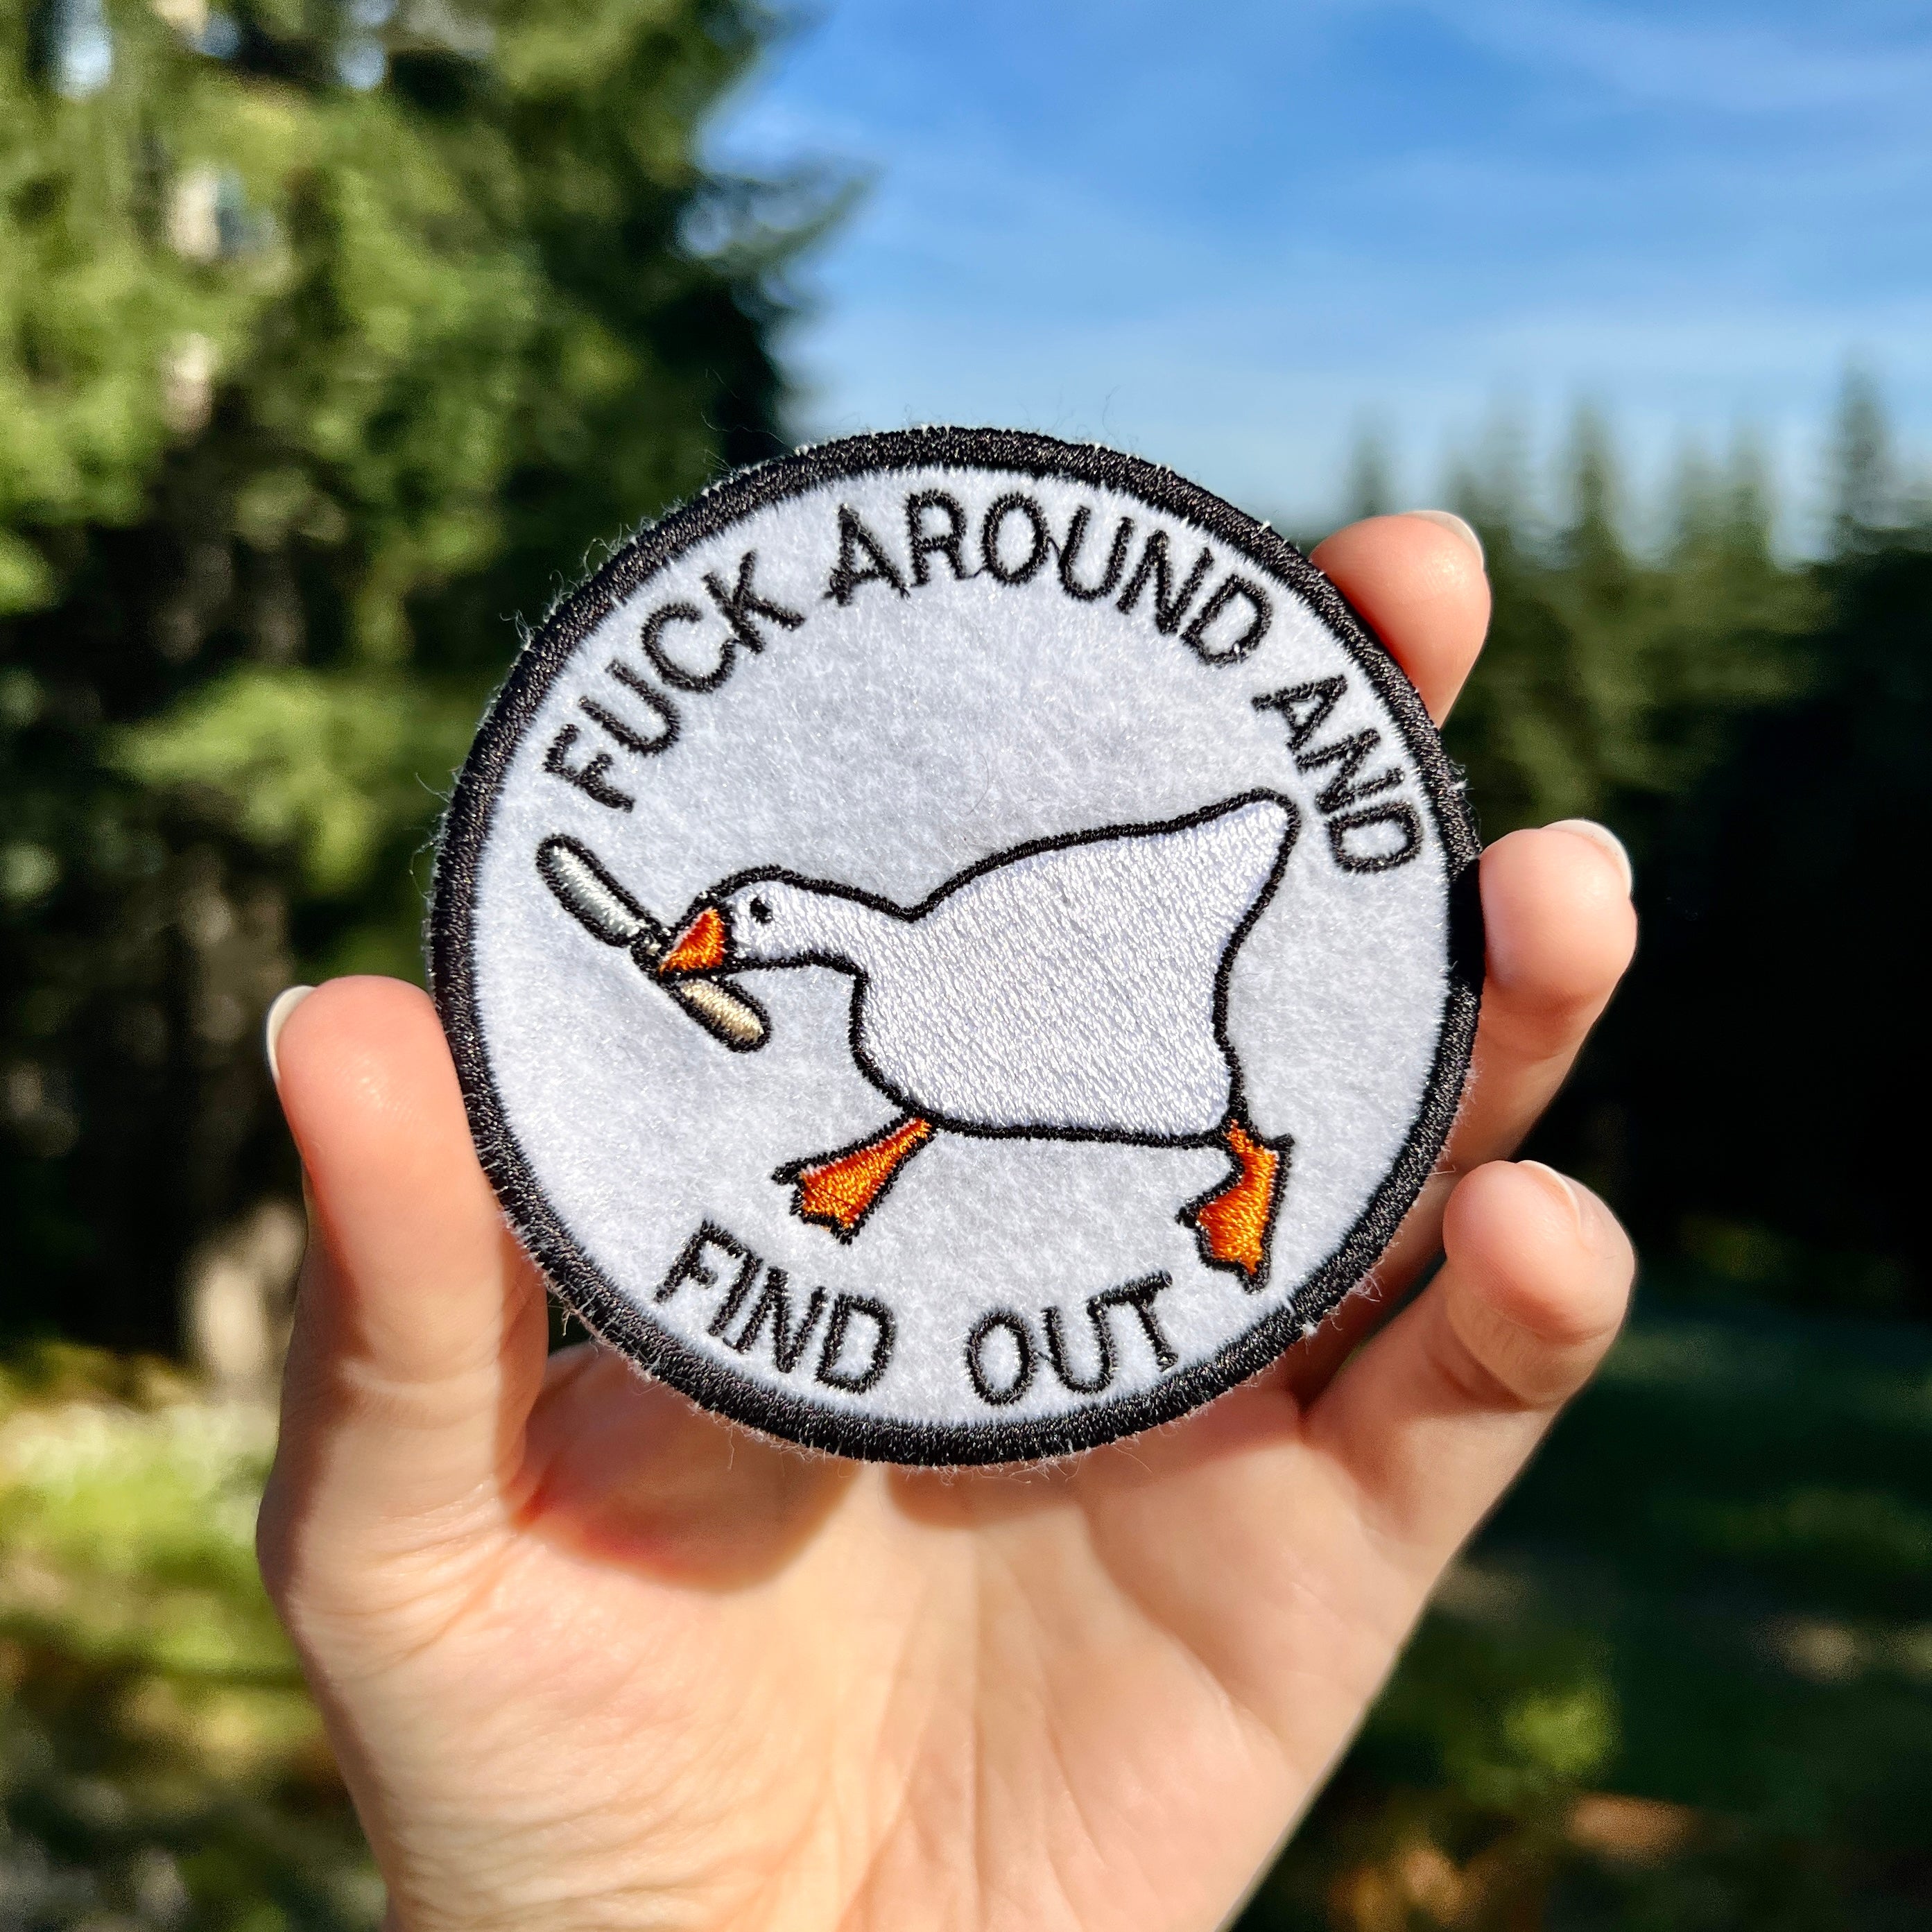 Untitled Goose Game "Fuck Around and Find Out" Embroidered Iron-on Patch